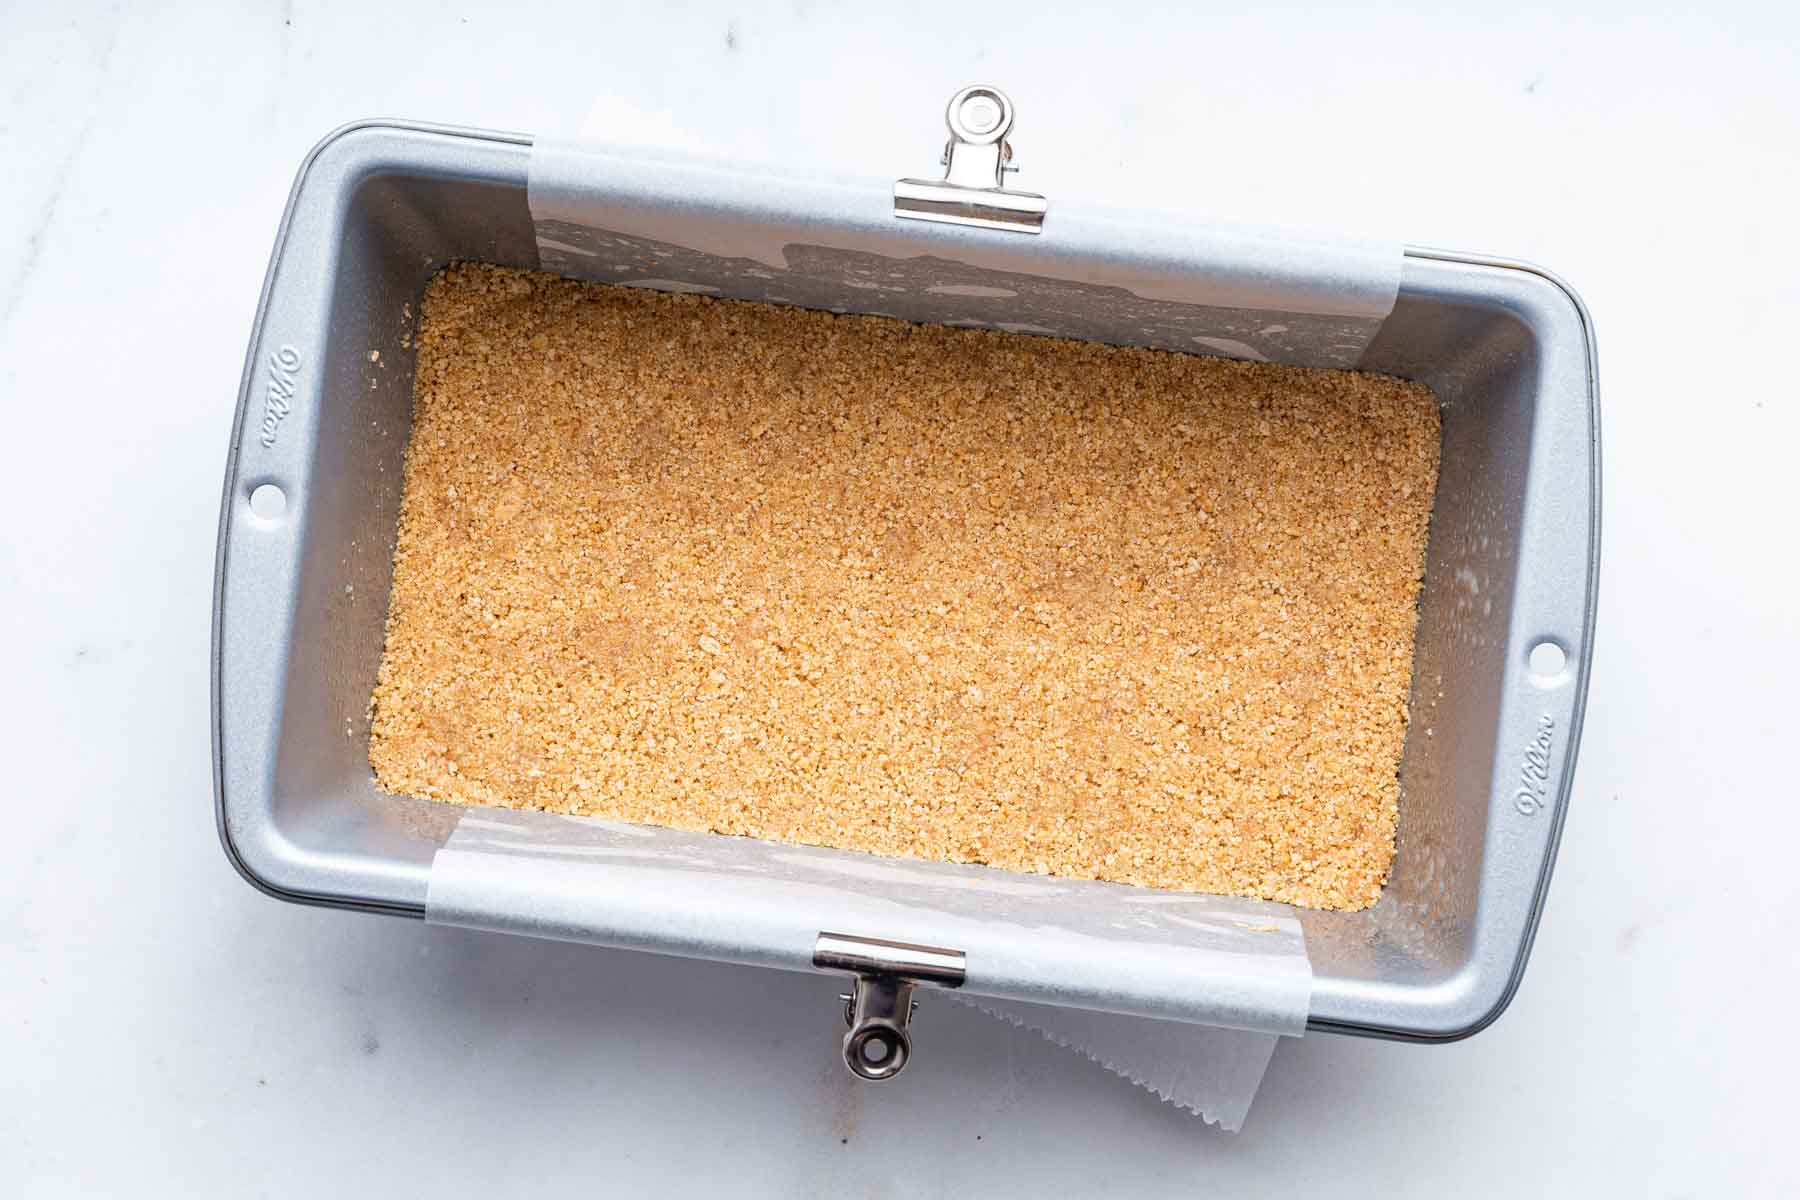 Graham cracker crust in a bread loaf pan lined with parchment paper.